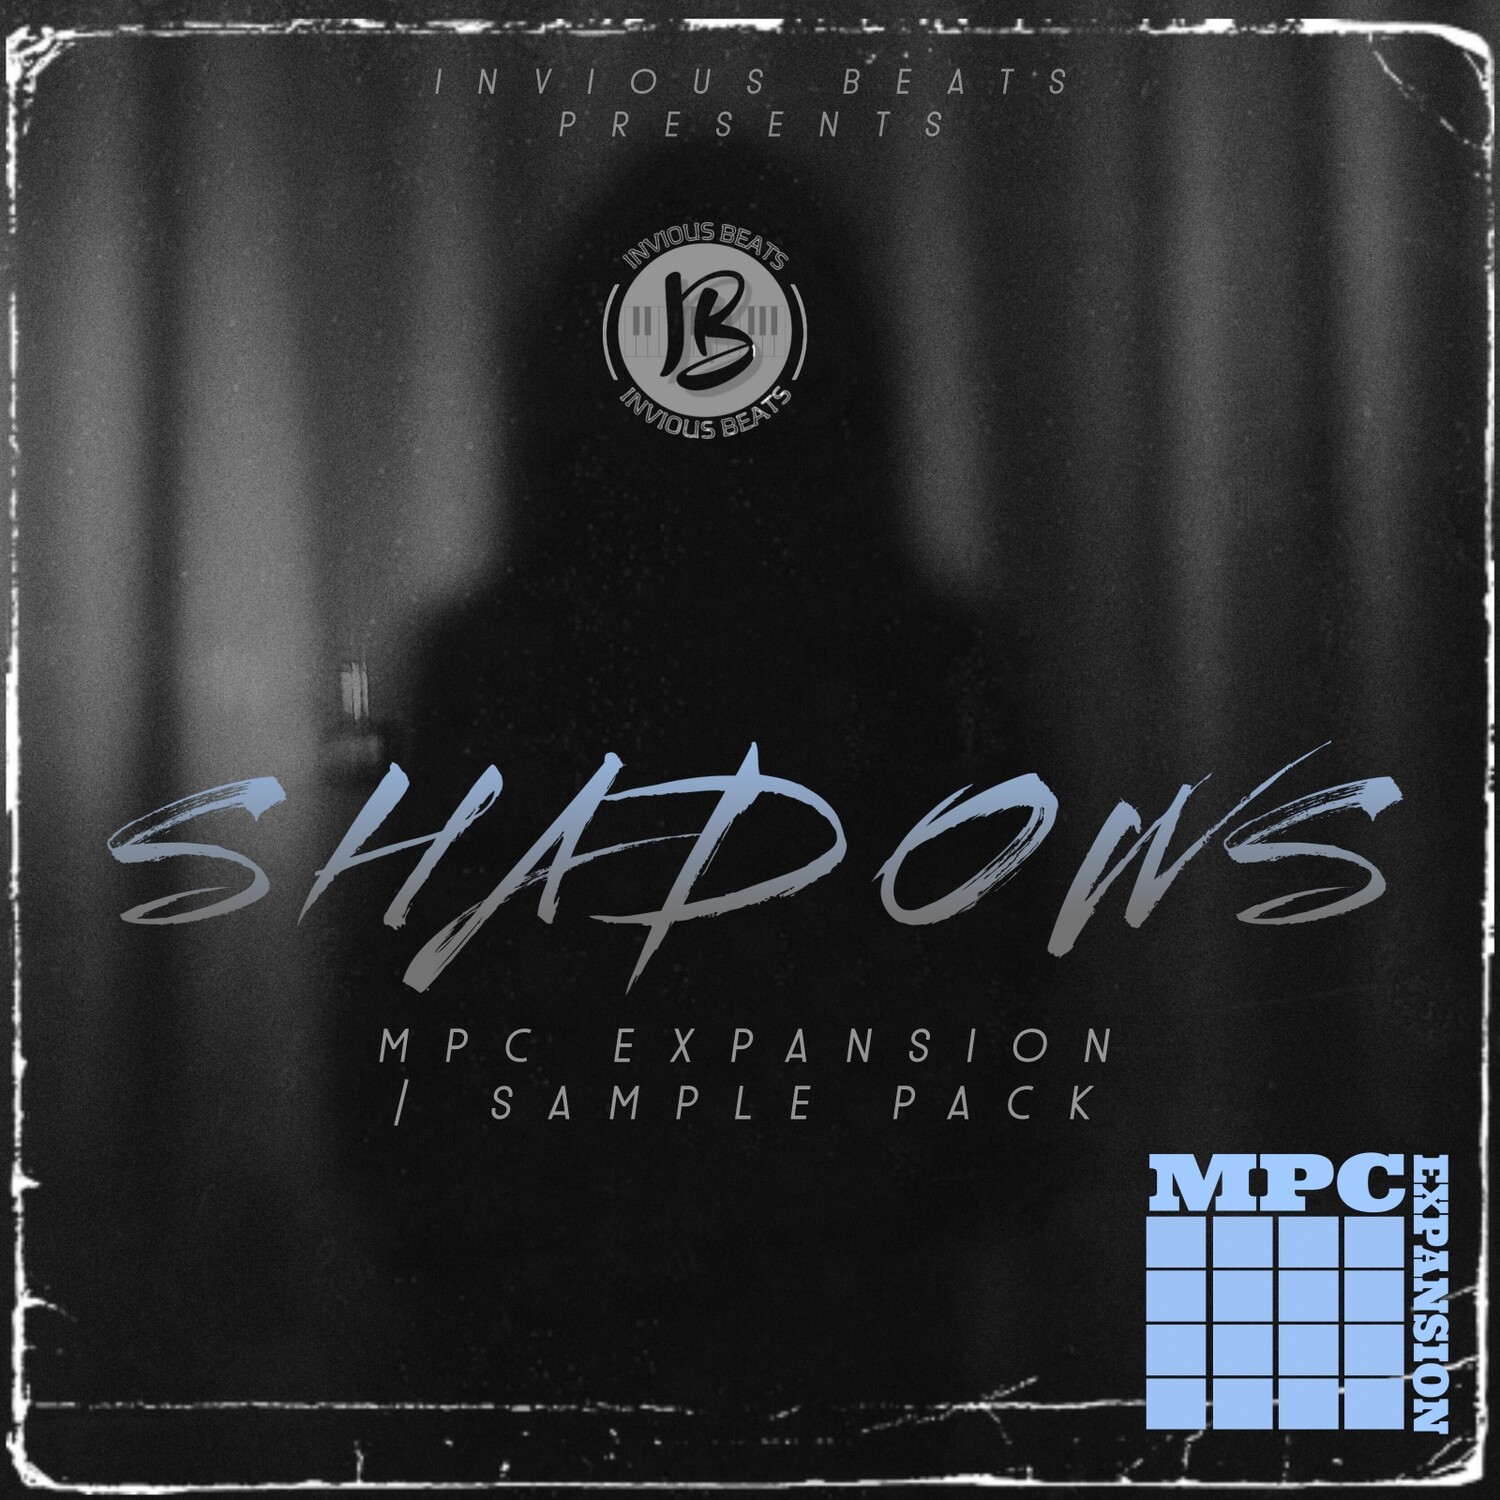 MPC EXPANSION 'SHADOWS' by INVIOUS